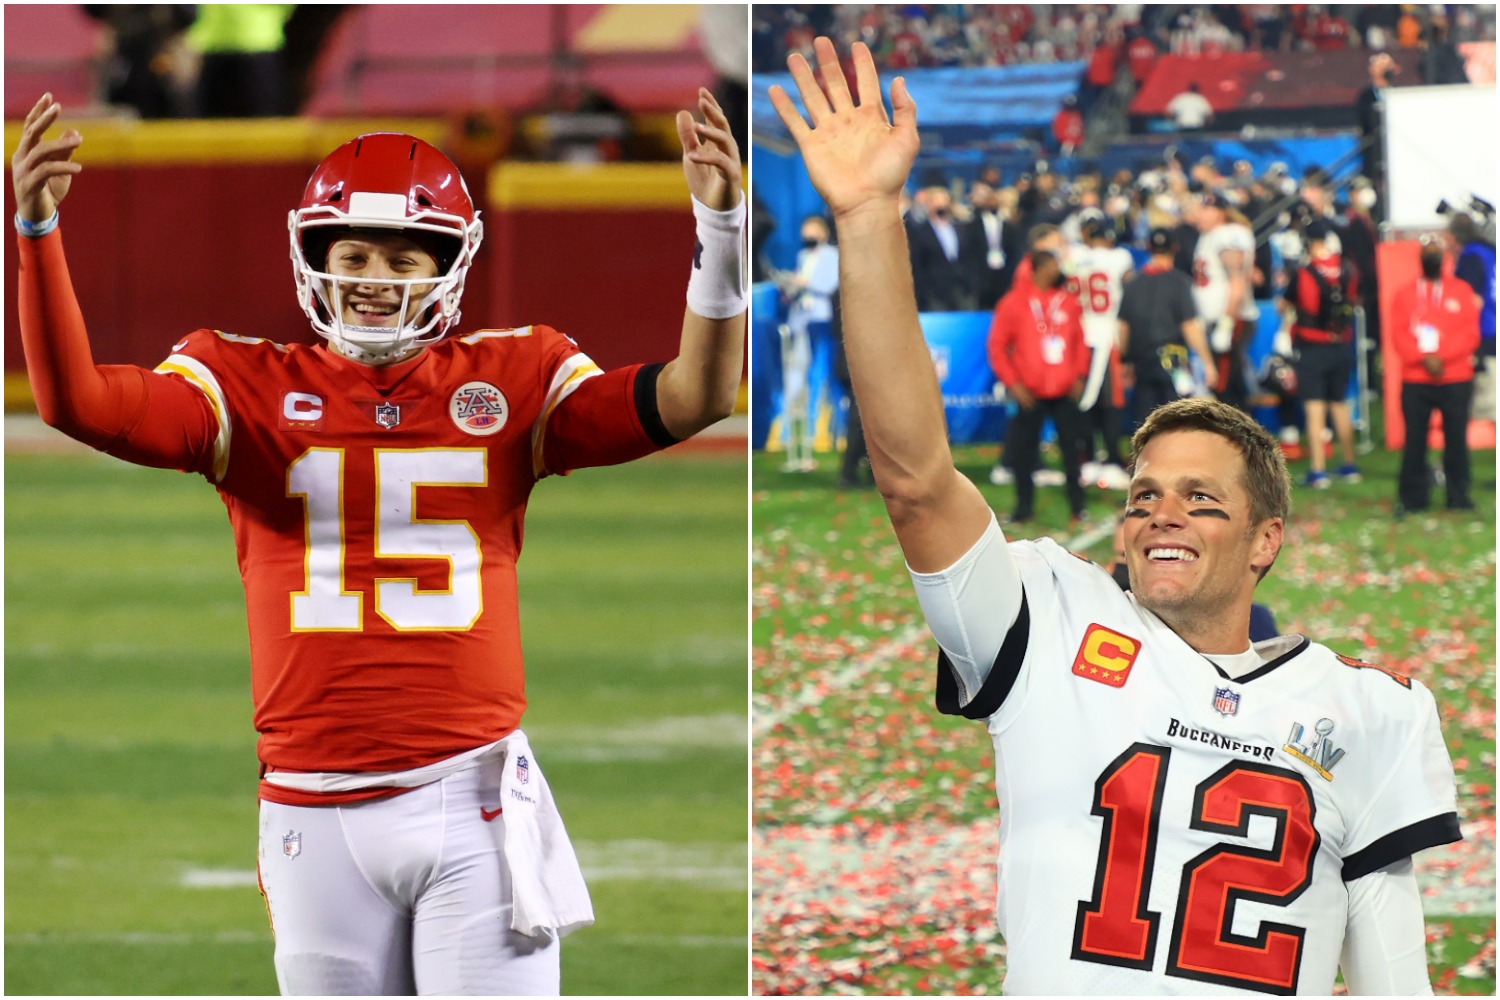 Patrick Mahomes seventh in QB pay, more interested in rings